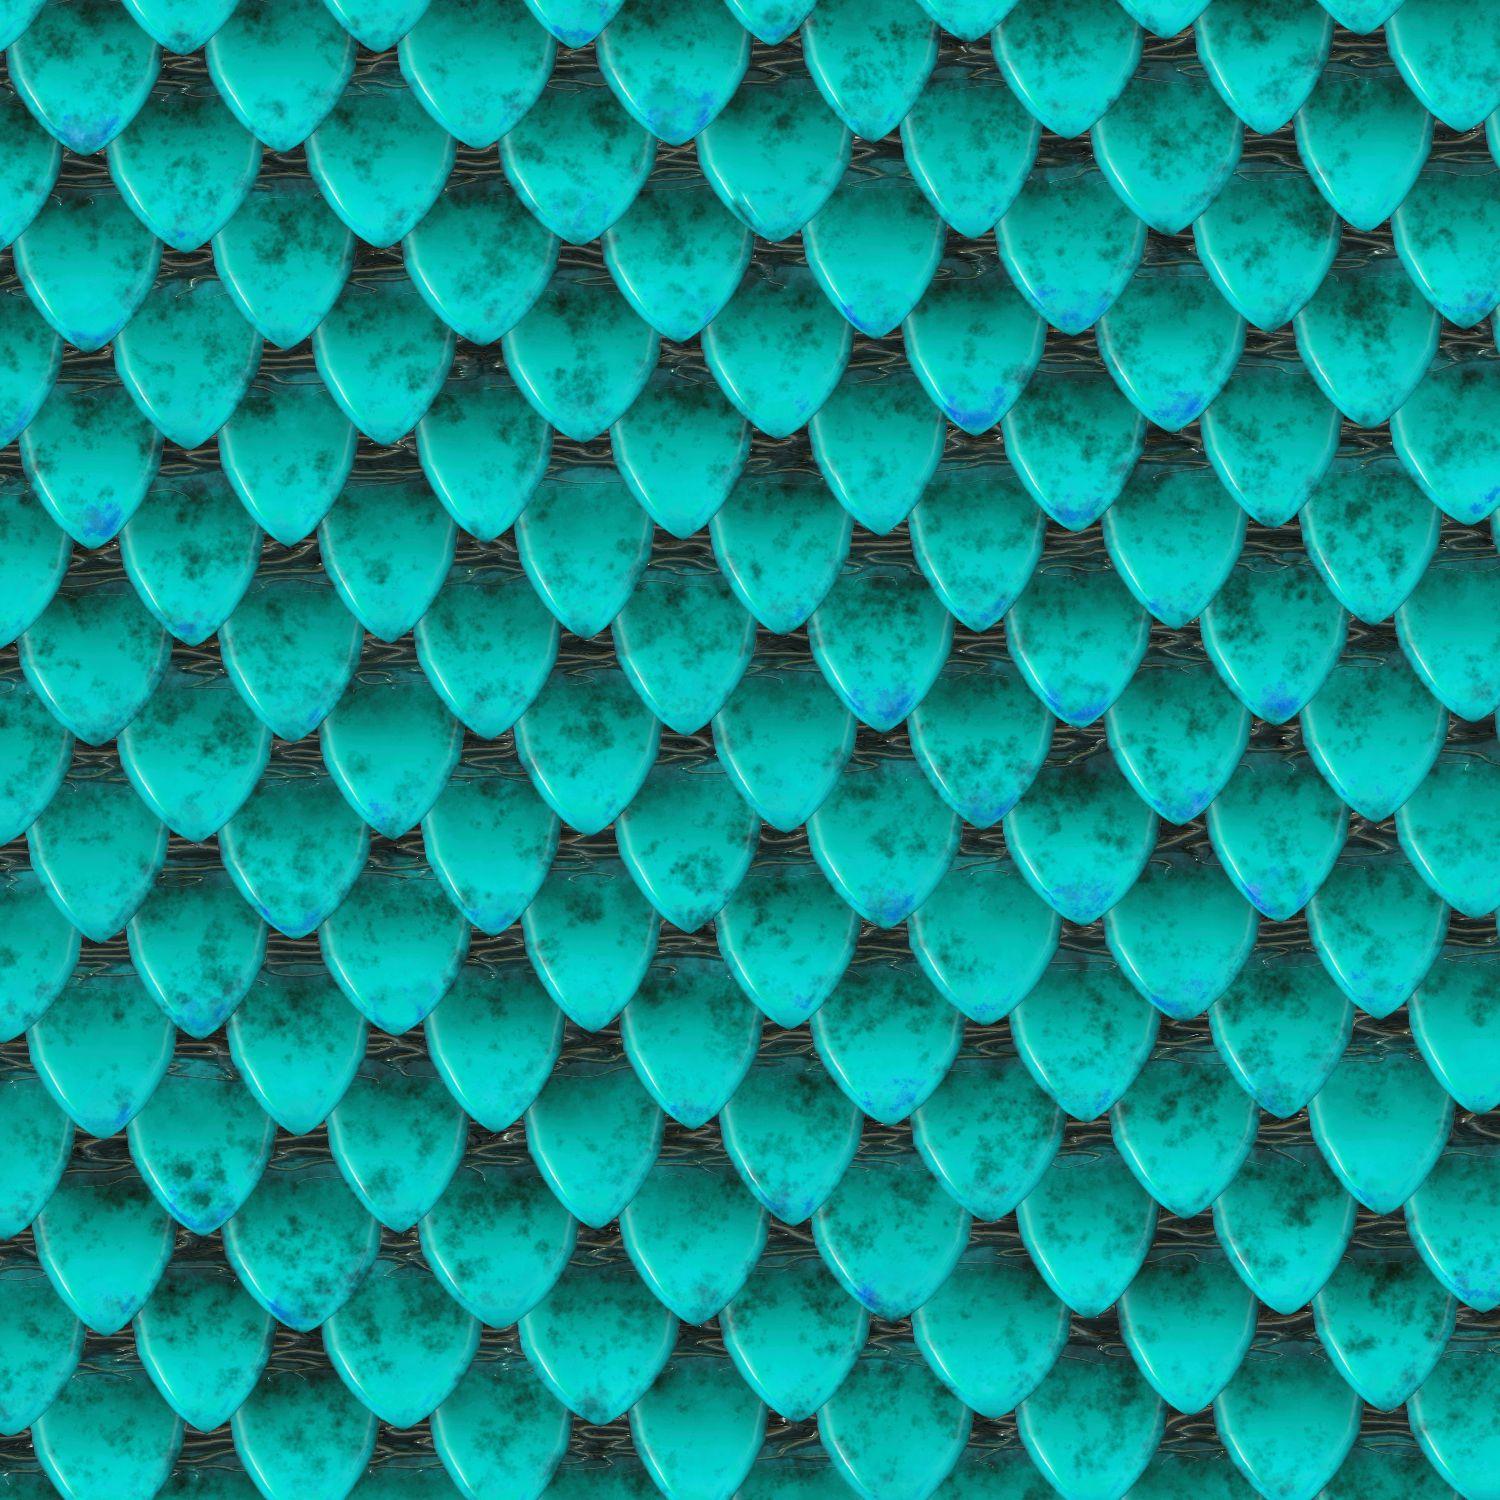 Dragon Scales Wallpapers - Top Free Dragon Scales Backgrounds ...